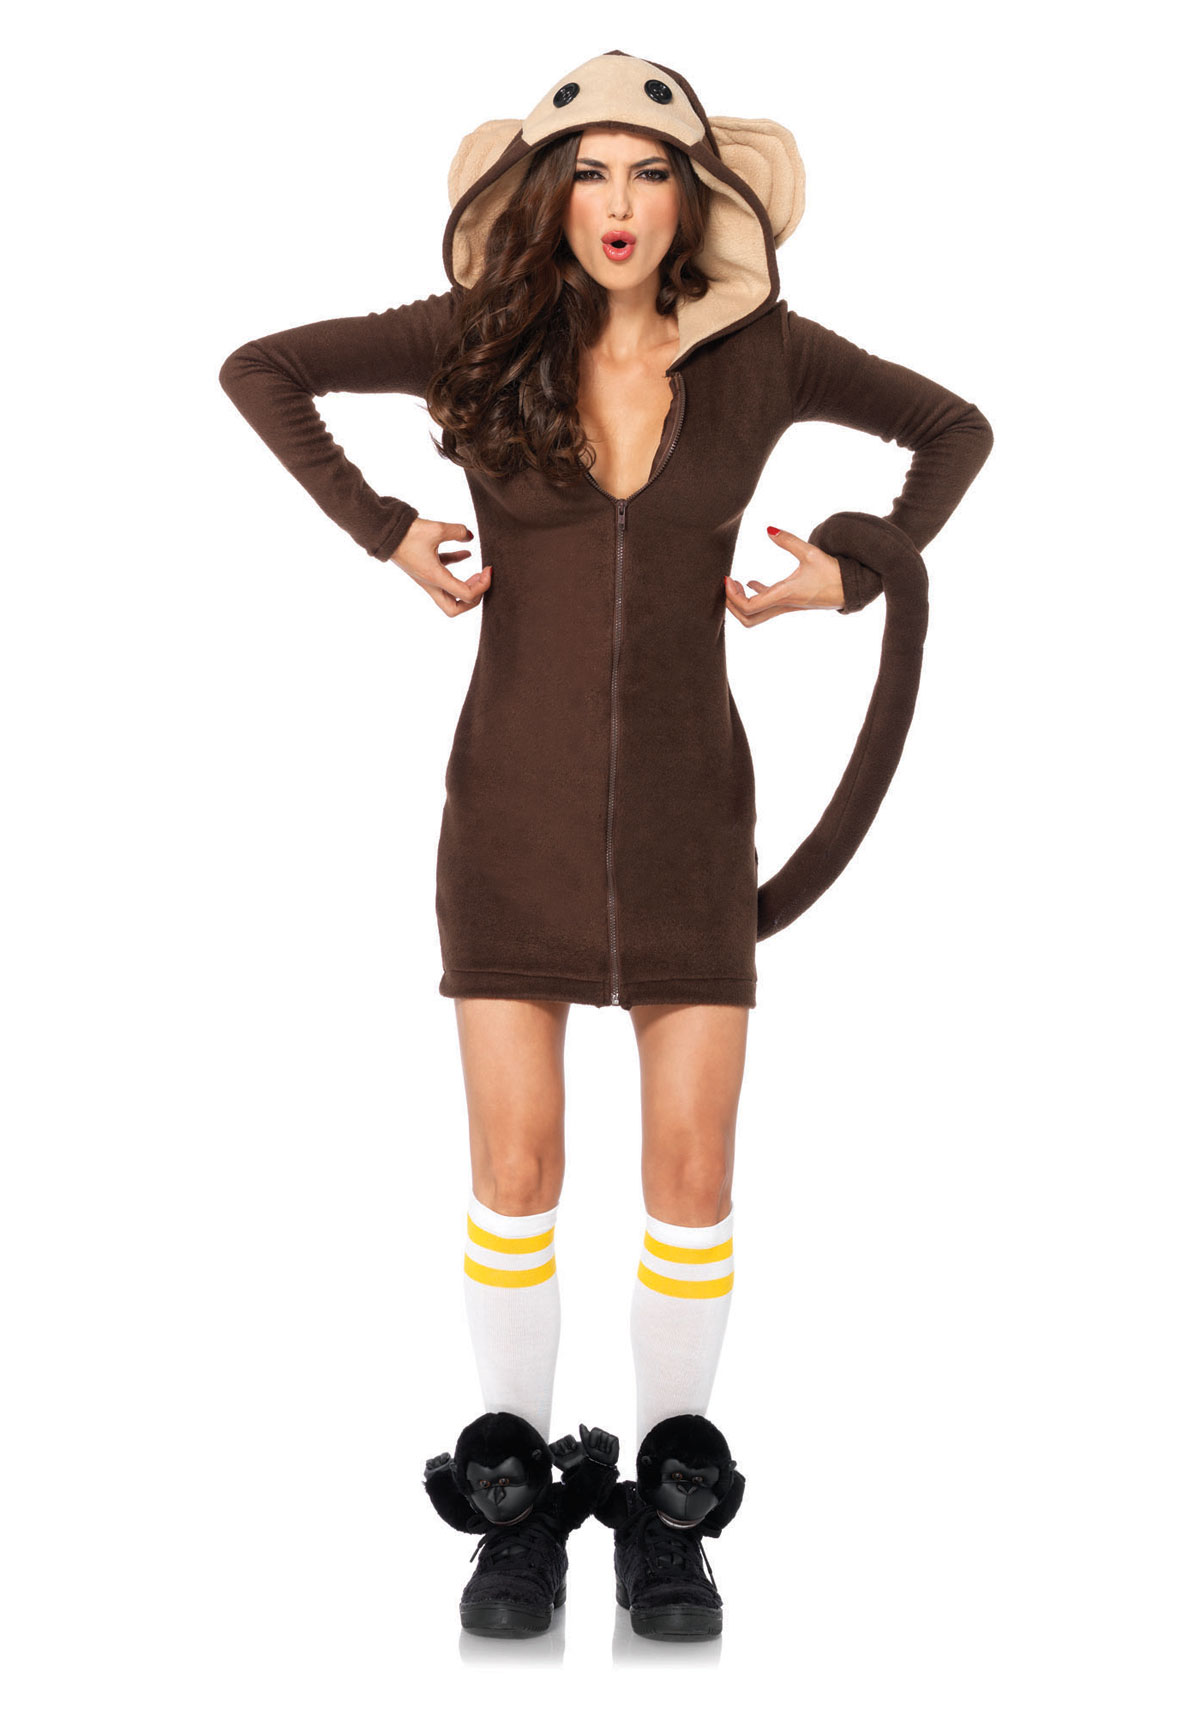 Leg Avenue Cozy Monkey, Dress With Attached Tail, And Funny Face Hood - Brown